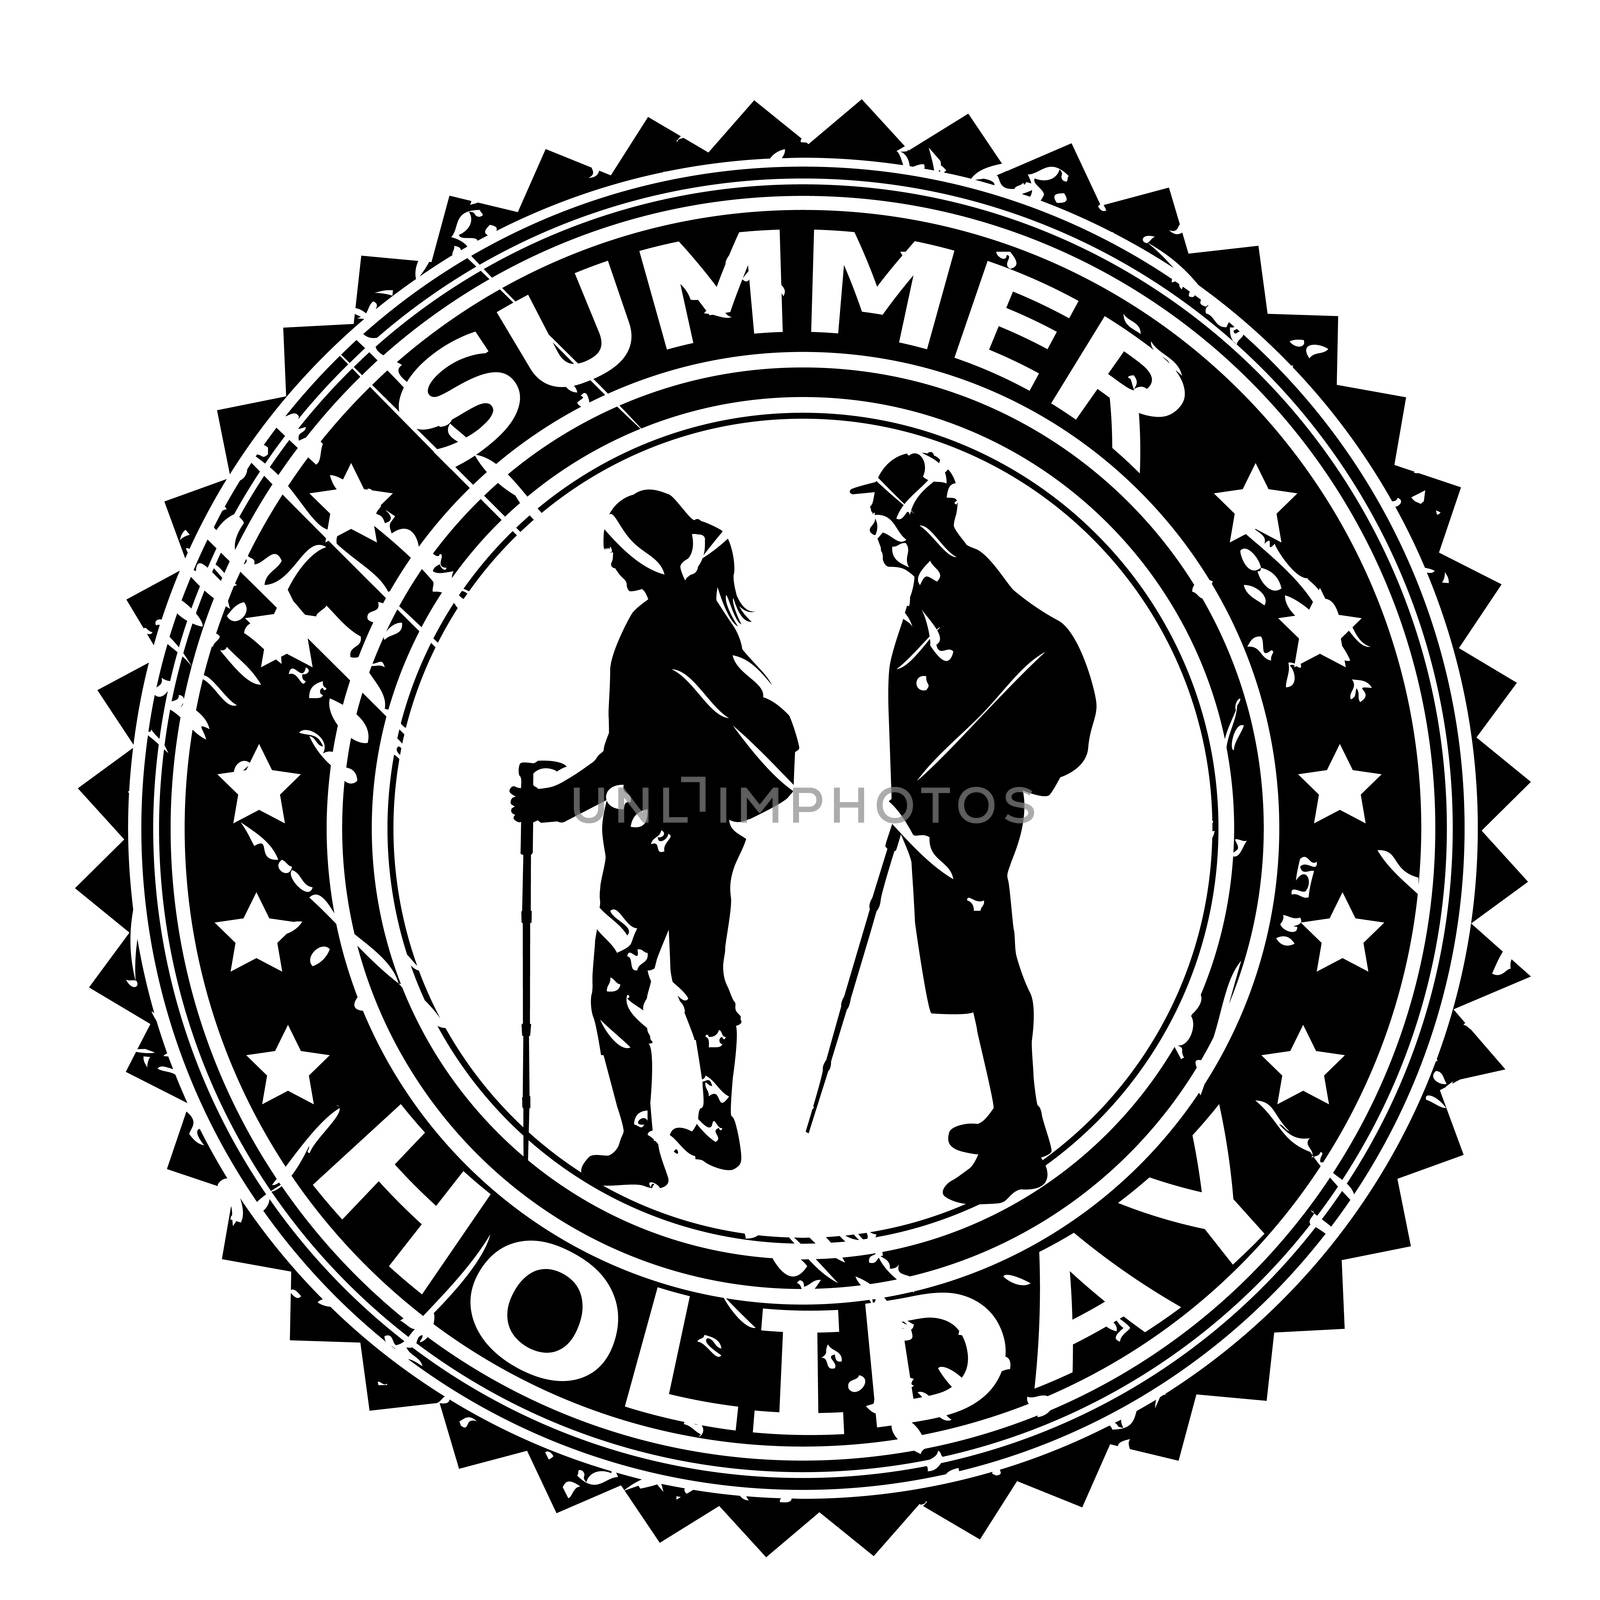 Summer Holiday rubber stamp with tourists silhouettes by hibrida13